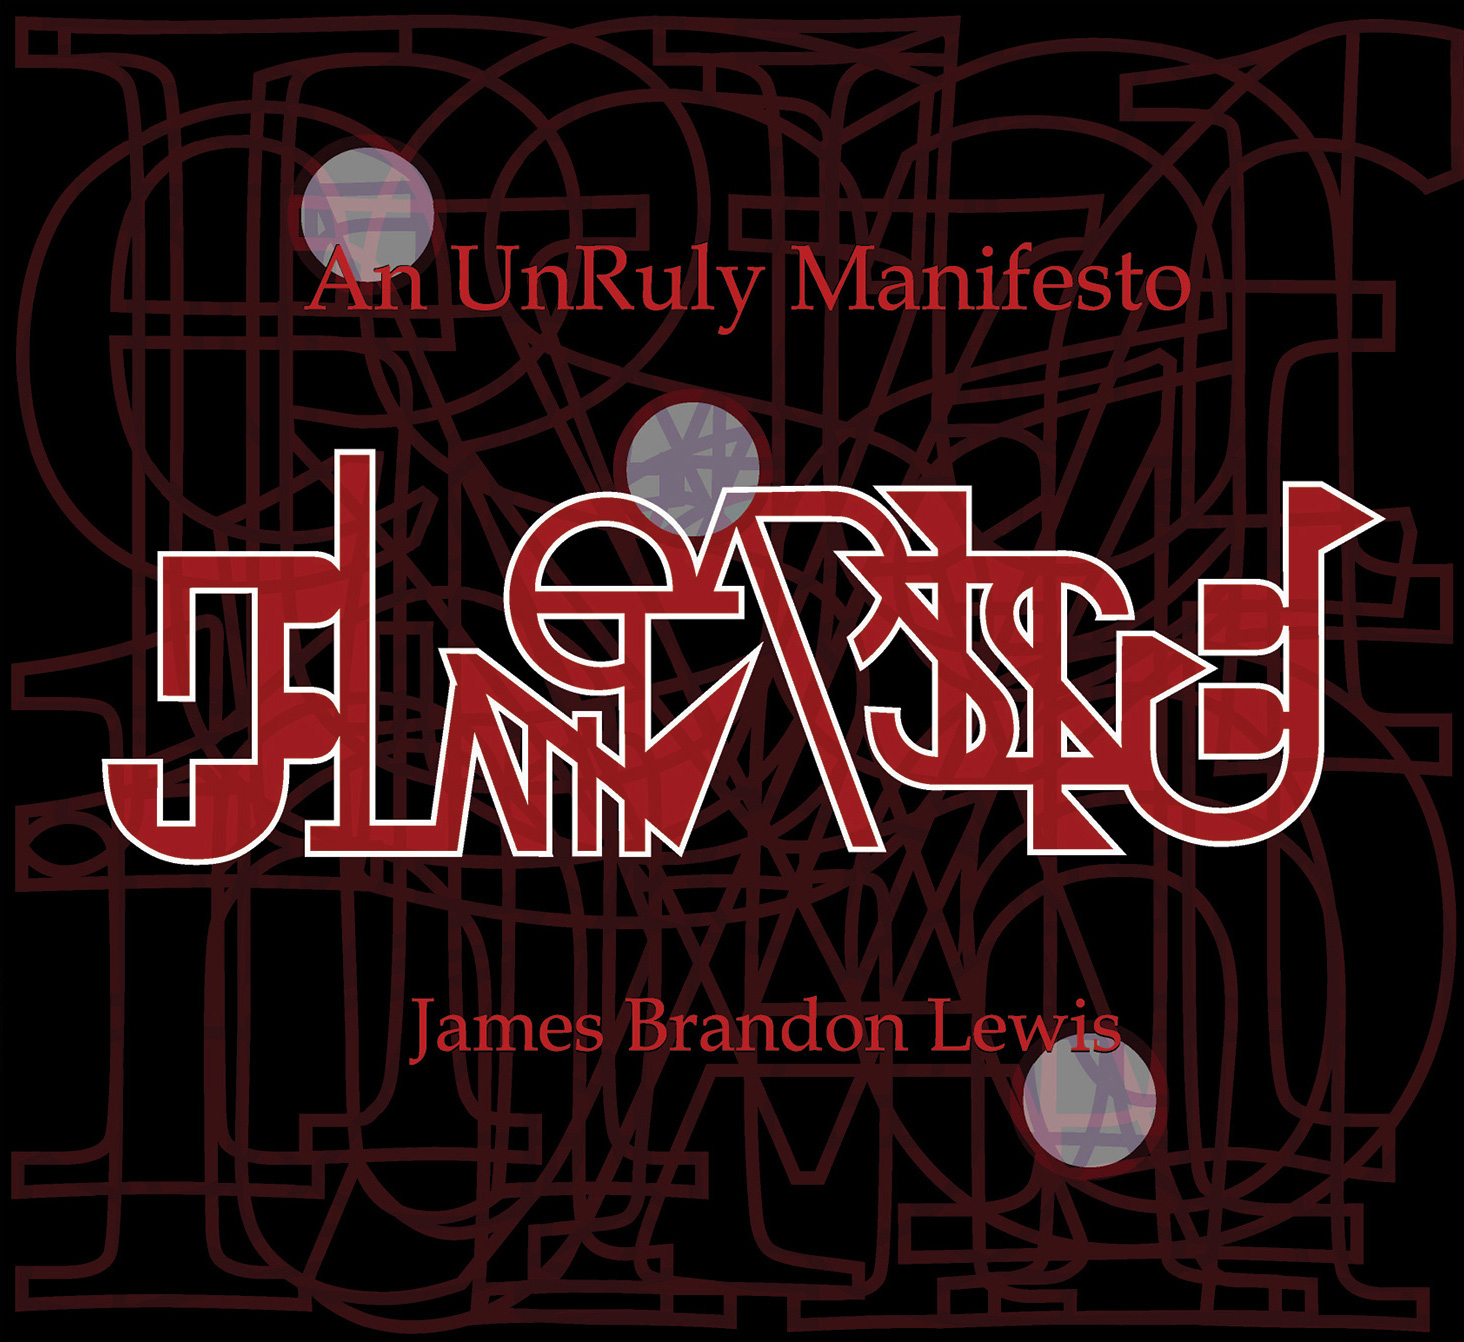 front cover of the An UnRuly Manifesto cd by James Brandon Lewis